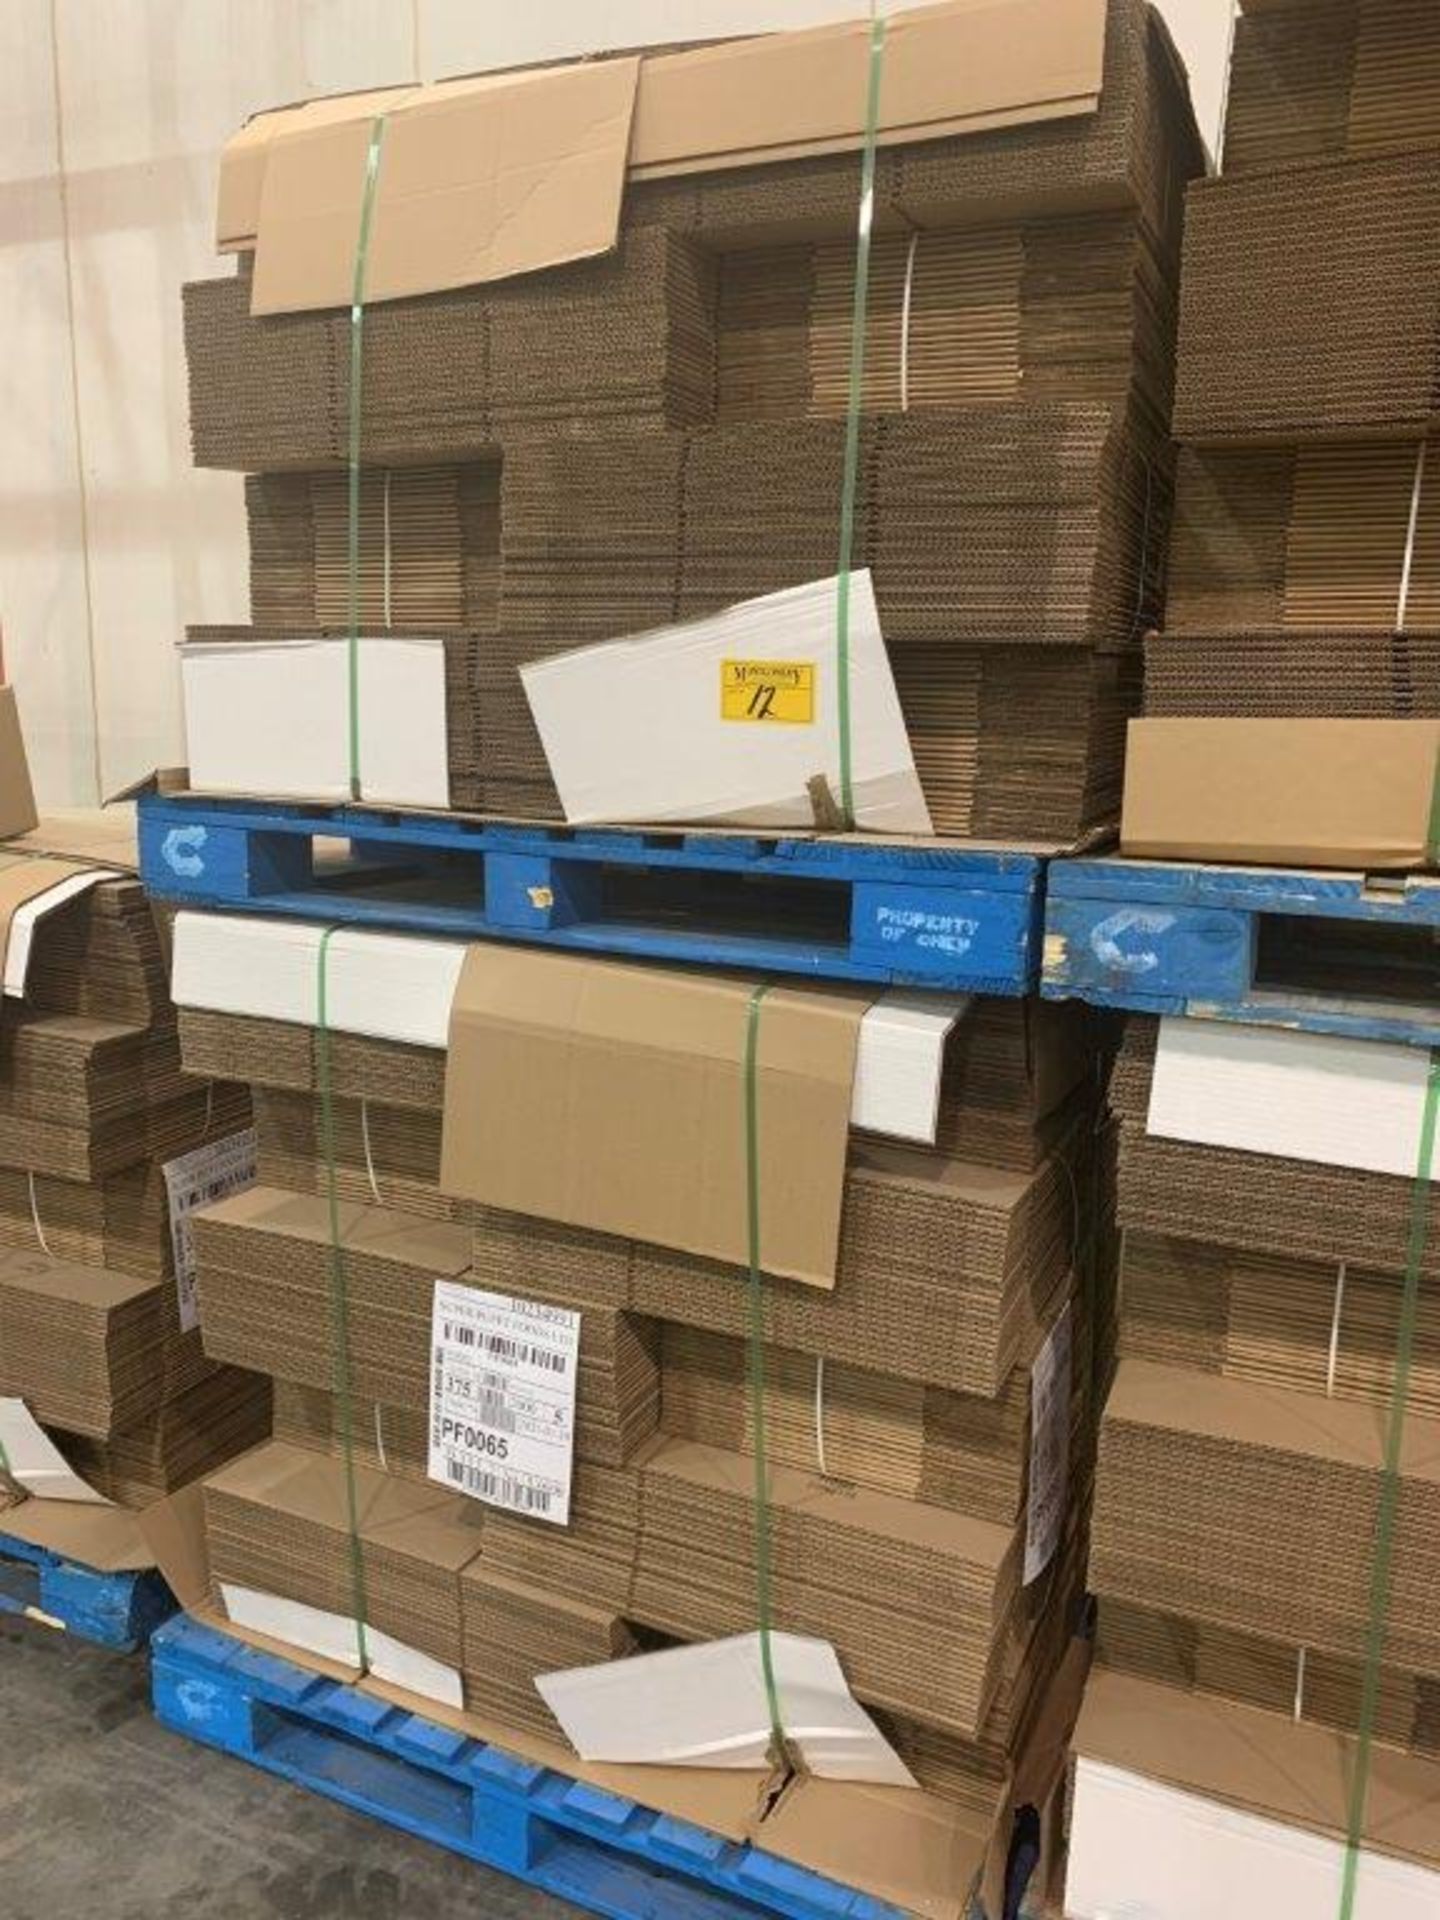 2-PALLETS PF0065 CORRIGATED CARDBOARD BOXES 375/300=675 BOXES APPROX 17X9X9 INCHES